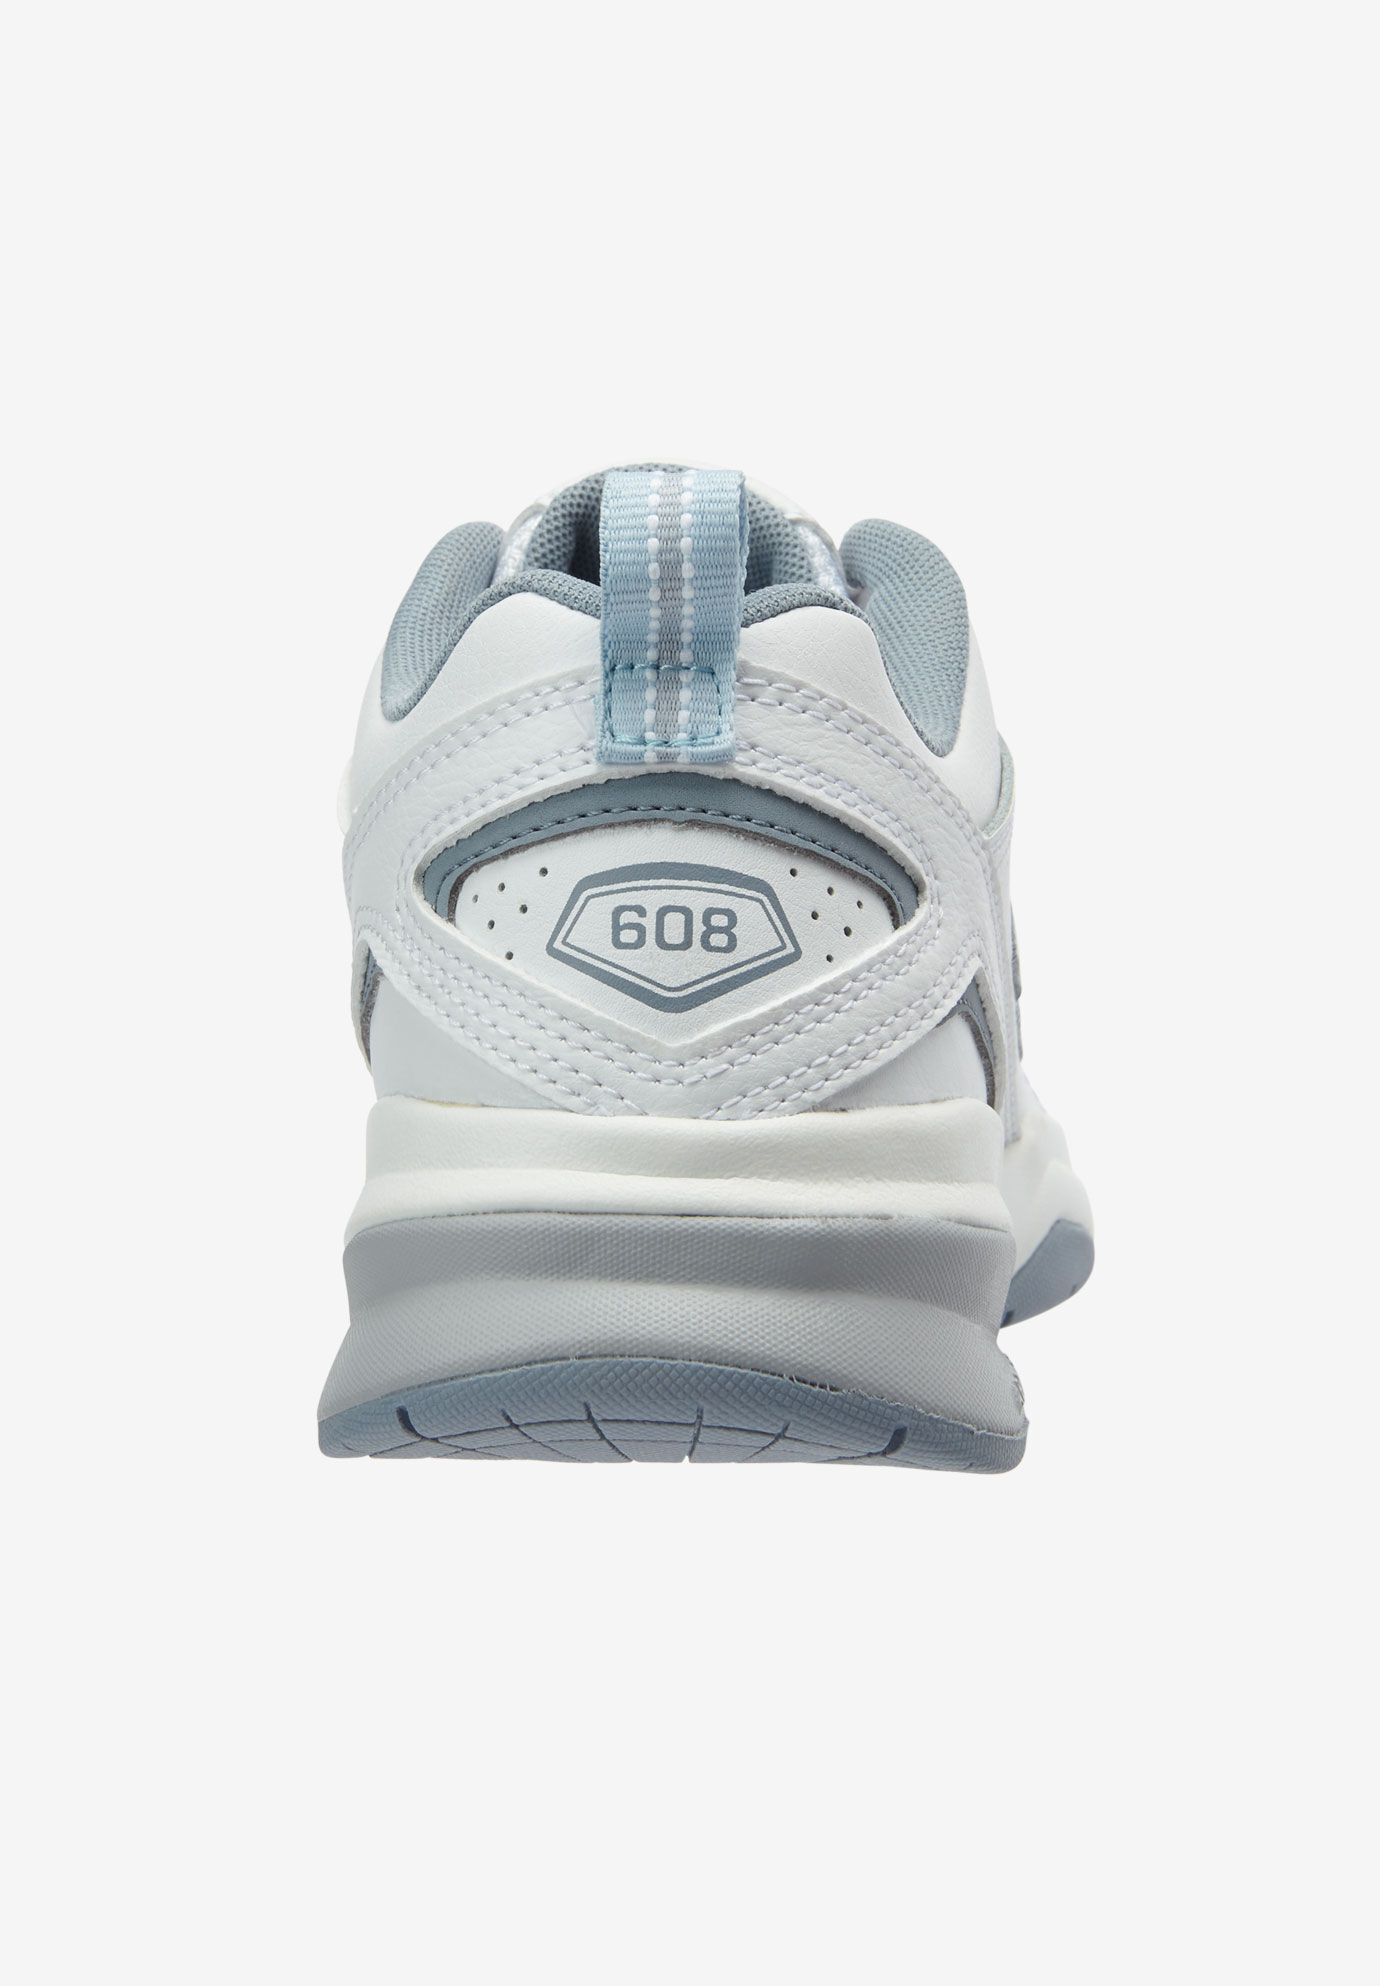 wx608 sneaker by new balance